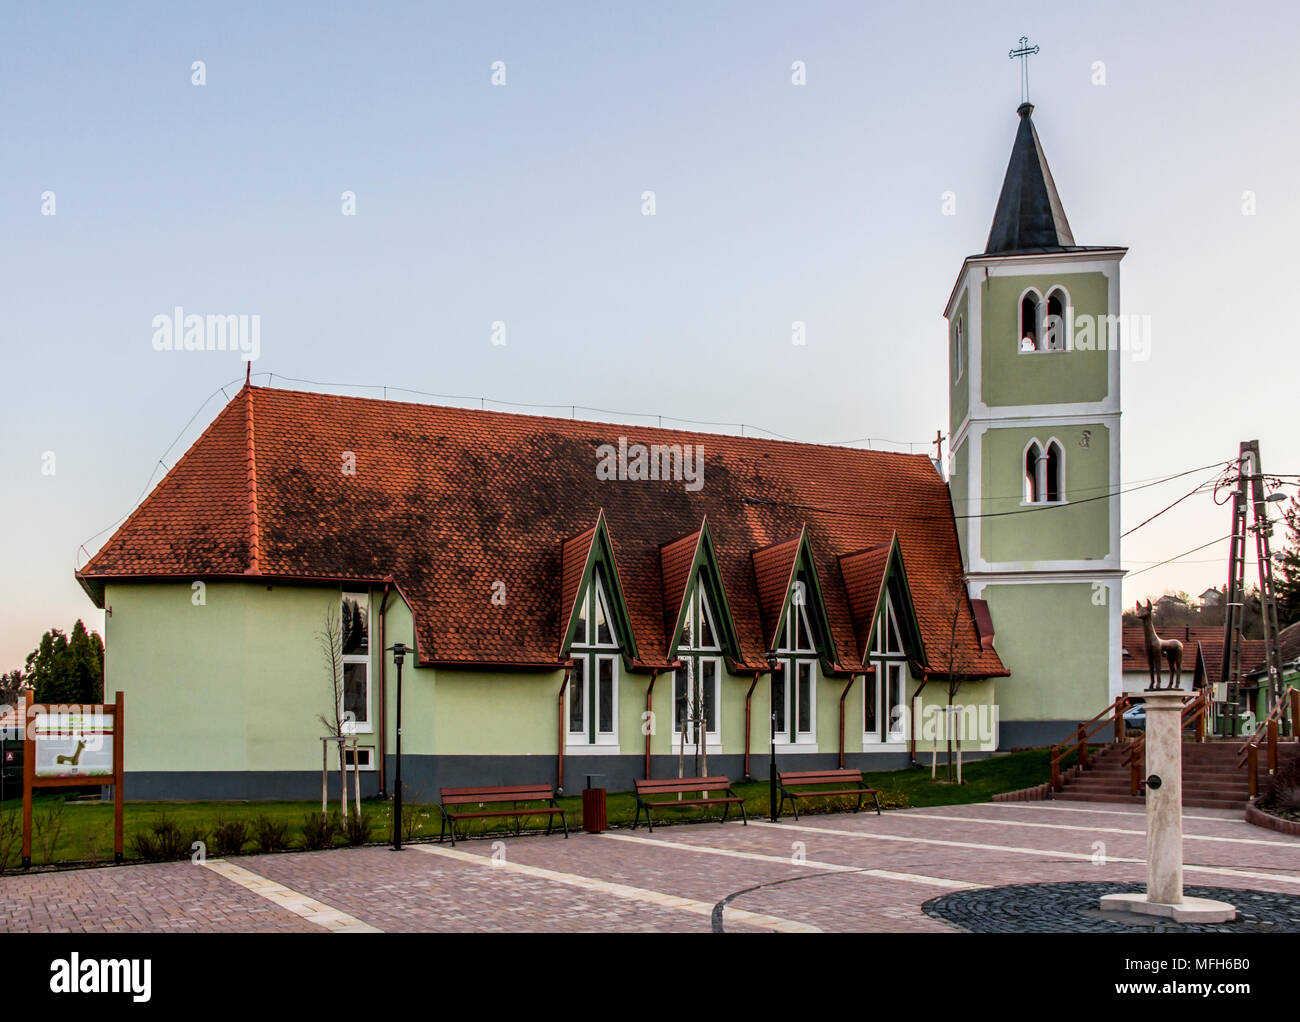 A local attraction: The church of the Heart of Jesus, modern nave and old belfry, Heviz, Egregy village, Hungary Stock Photo